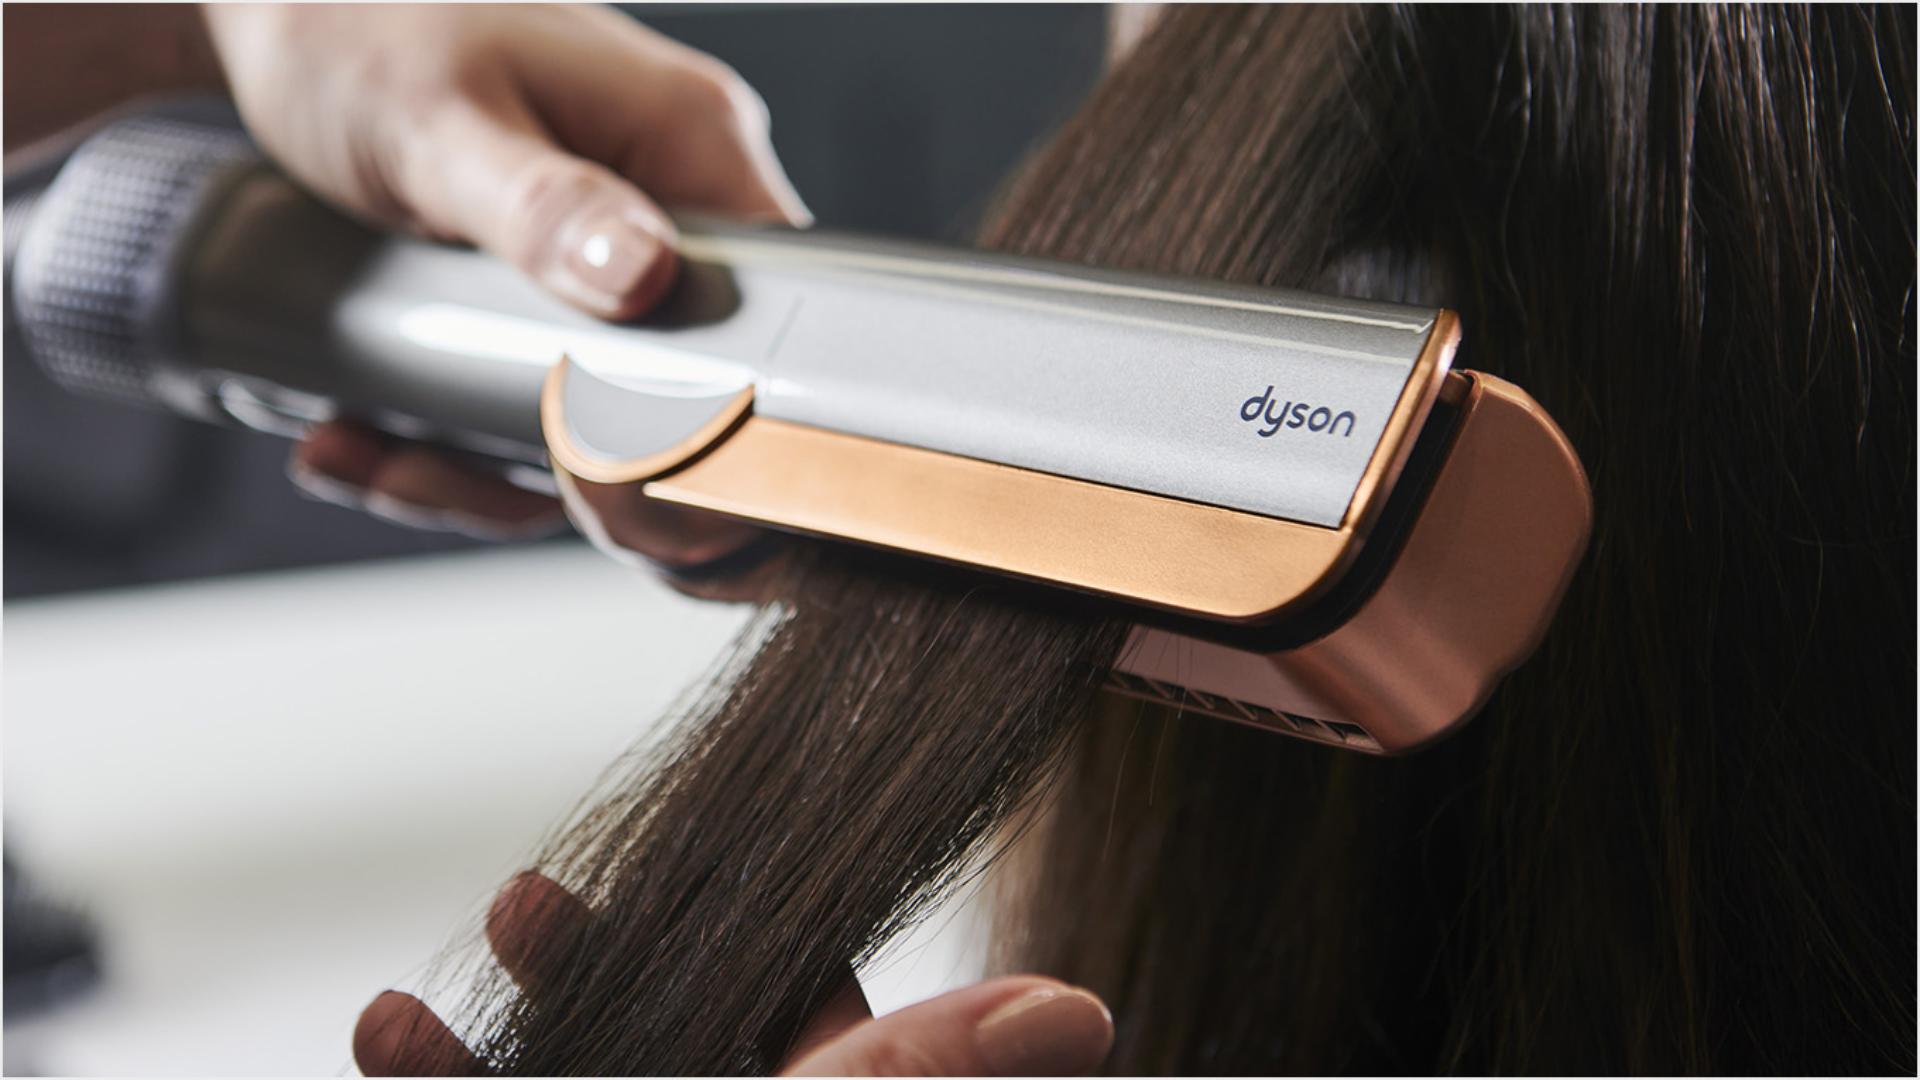 Close-up of model using the Dyson Airstrait on a tress of hair.